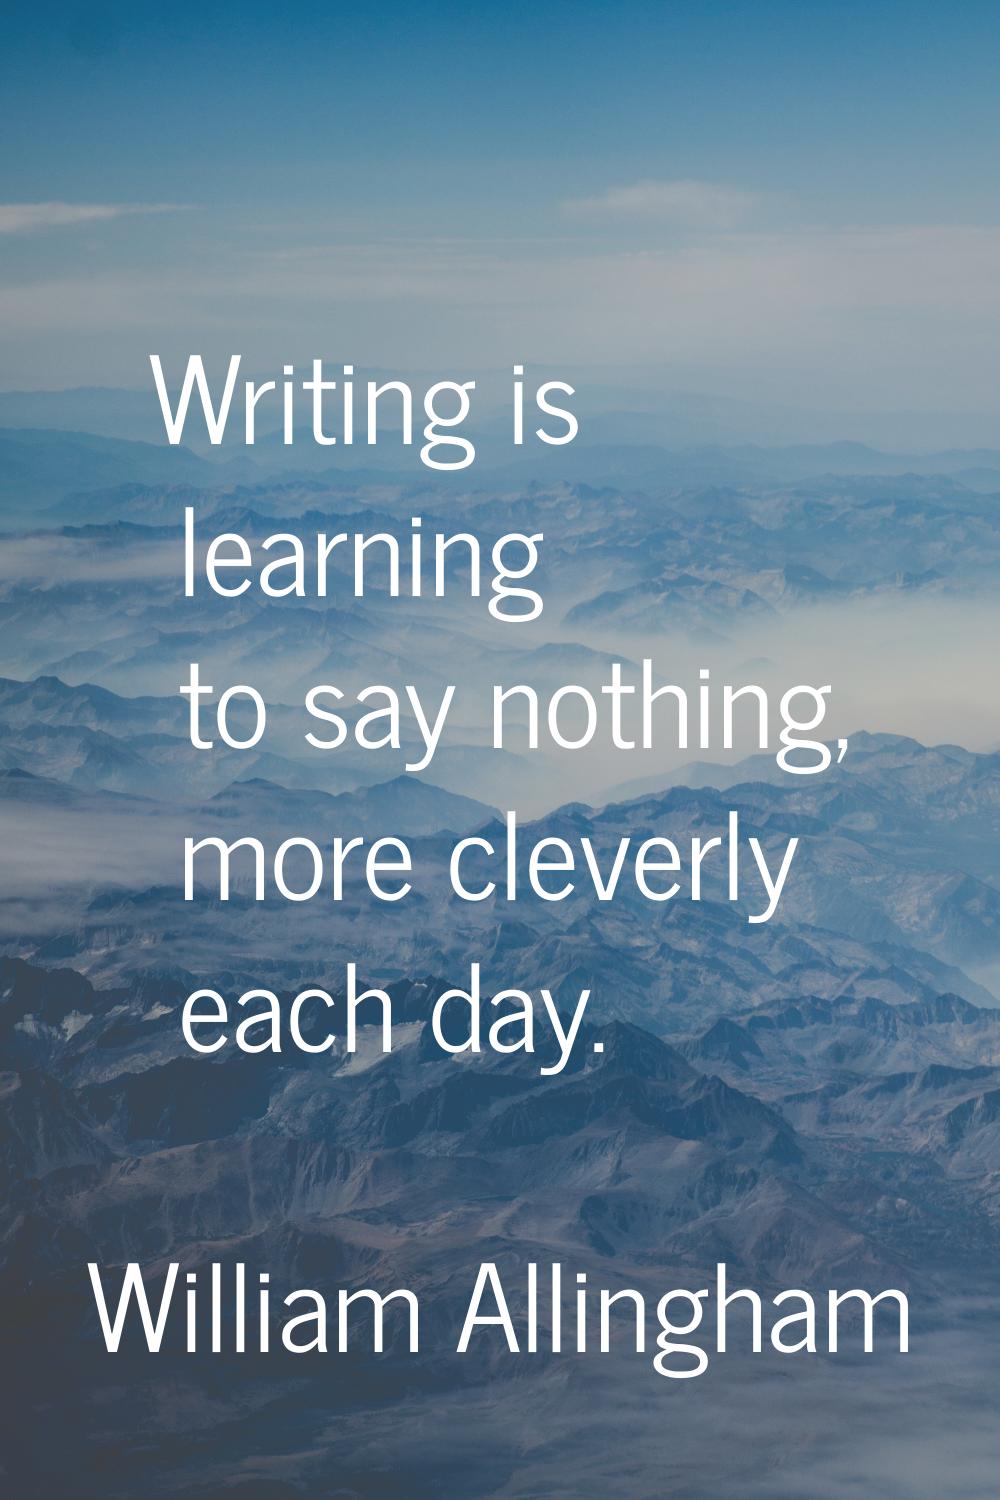 Writing is learning to say nothing, more cleverly each day.